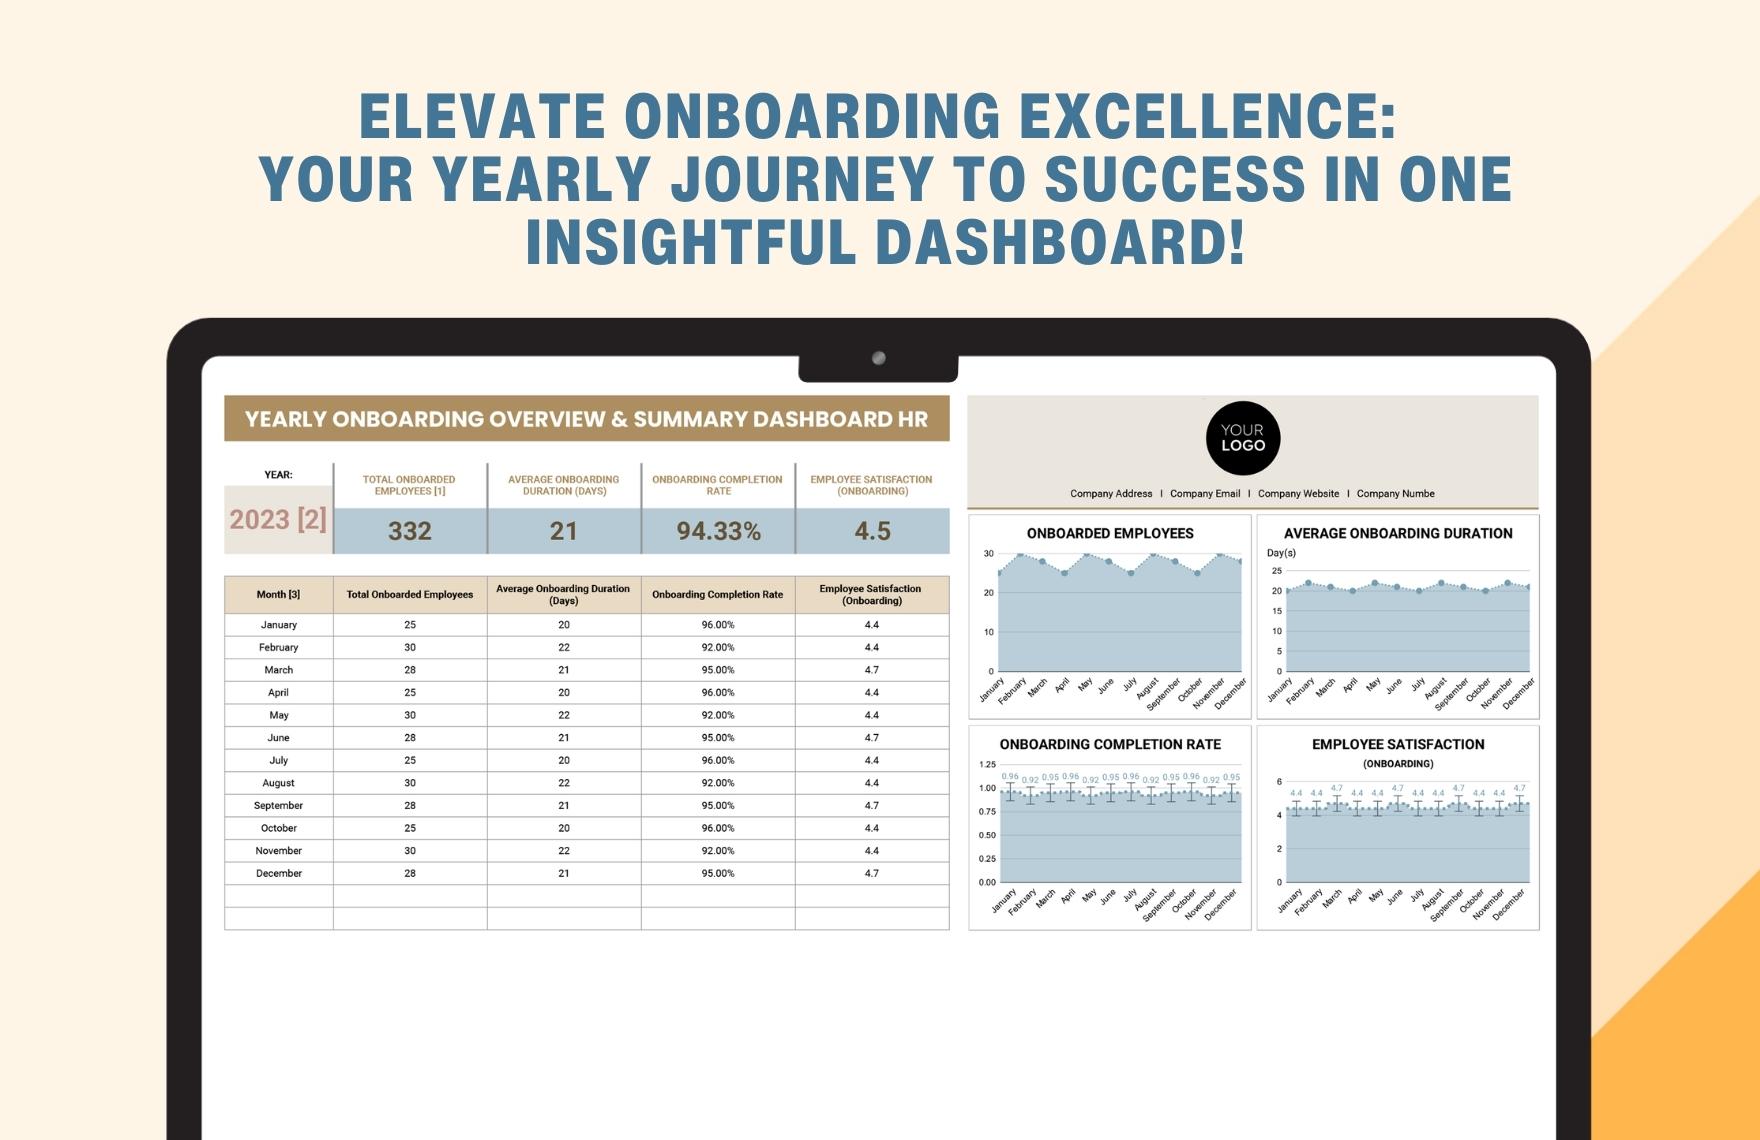 Yearly Onboarding Overview & Summary Dashboard HR Template